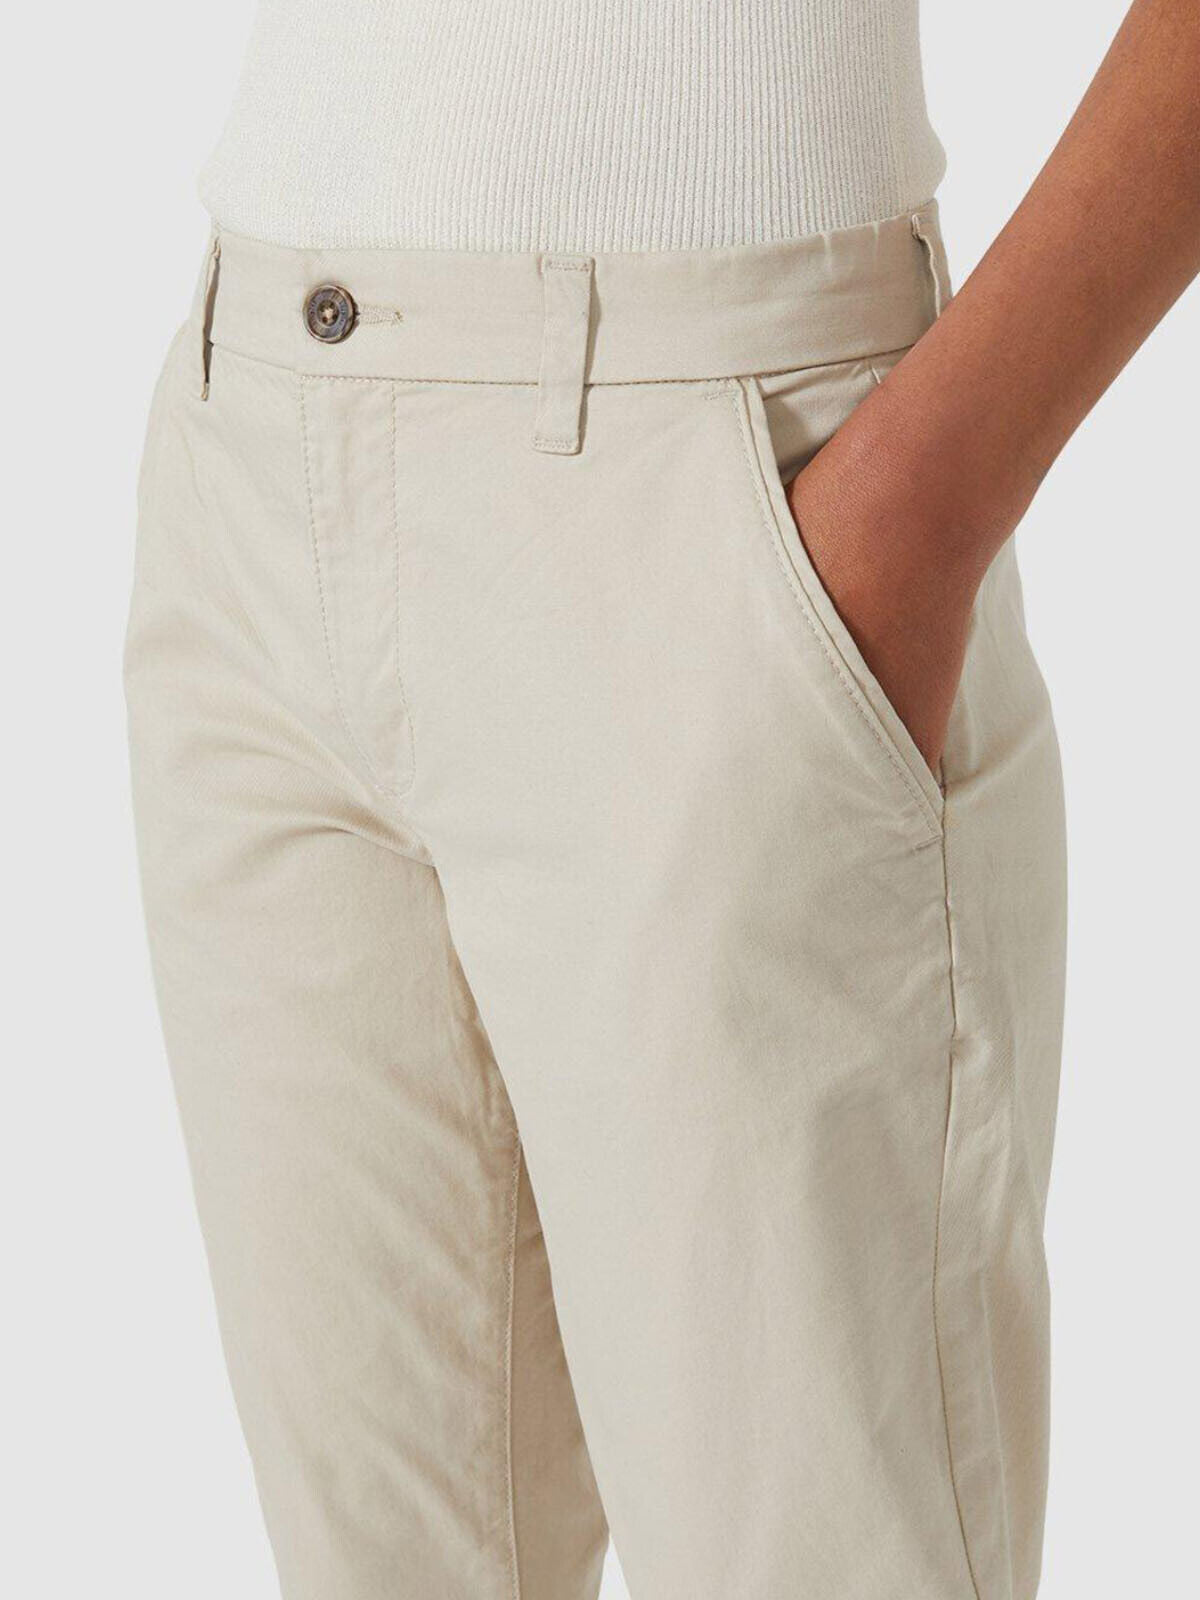 EX Principles Stone Cropped Chino Trousers Sizes 18, 20, 22